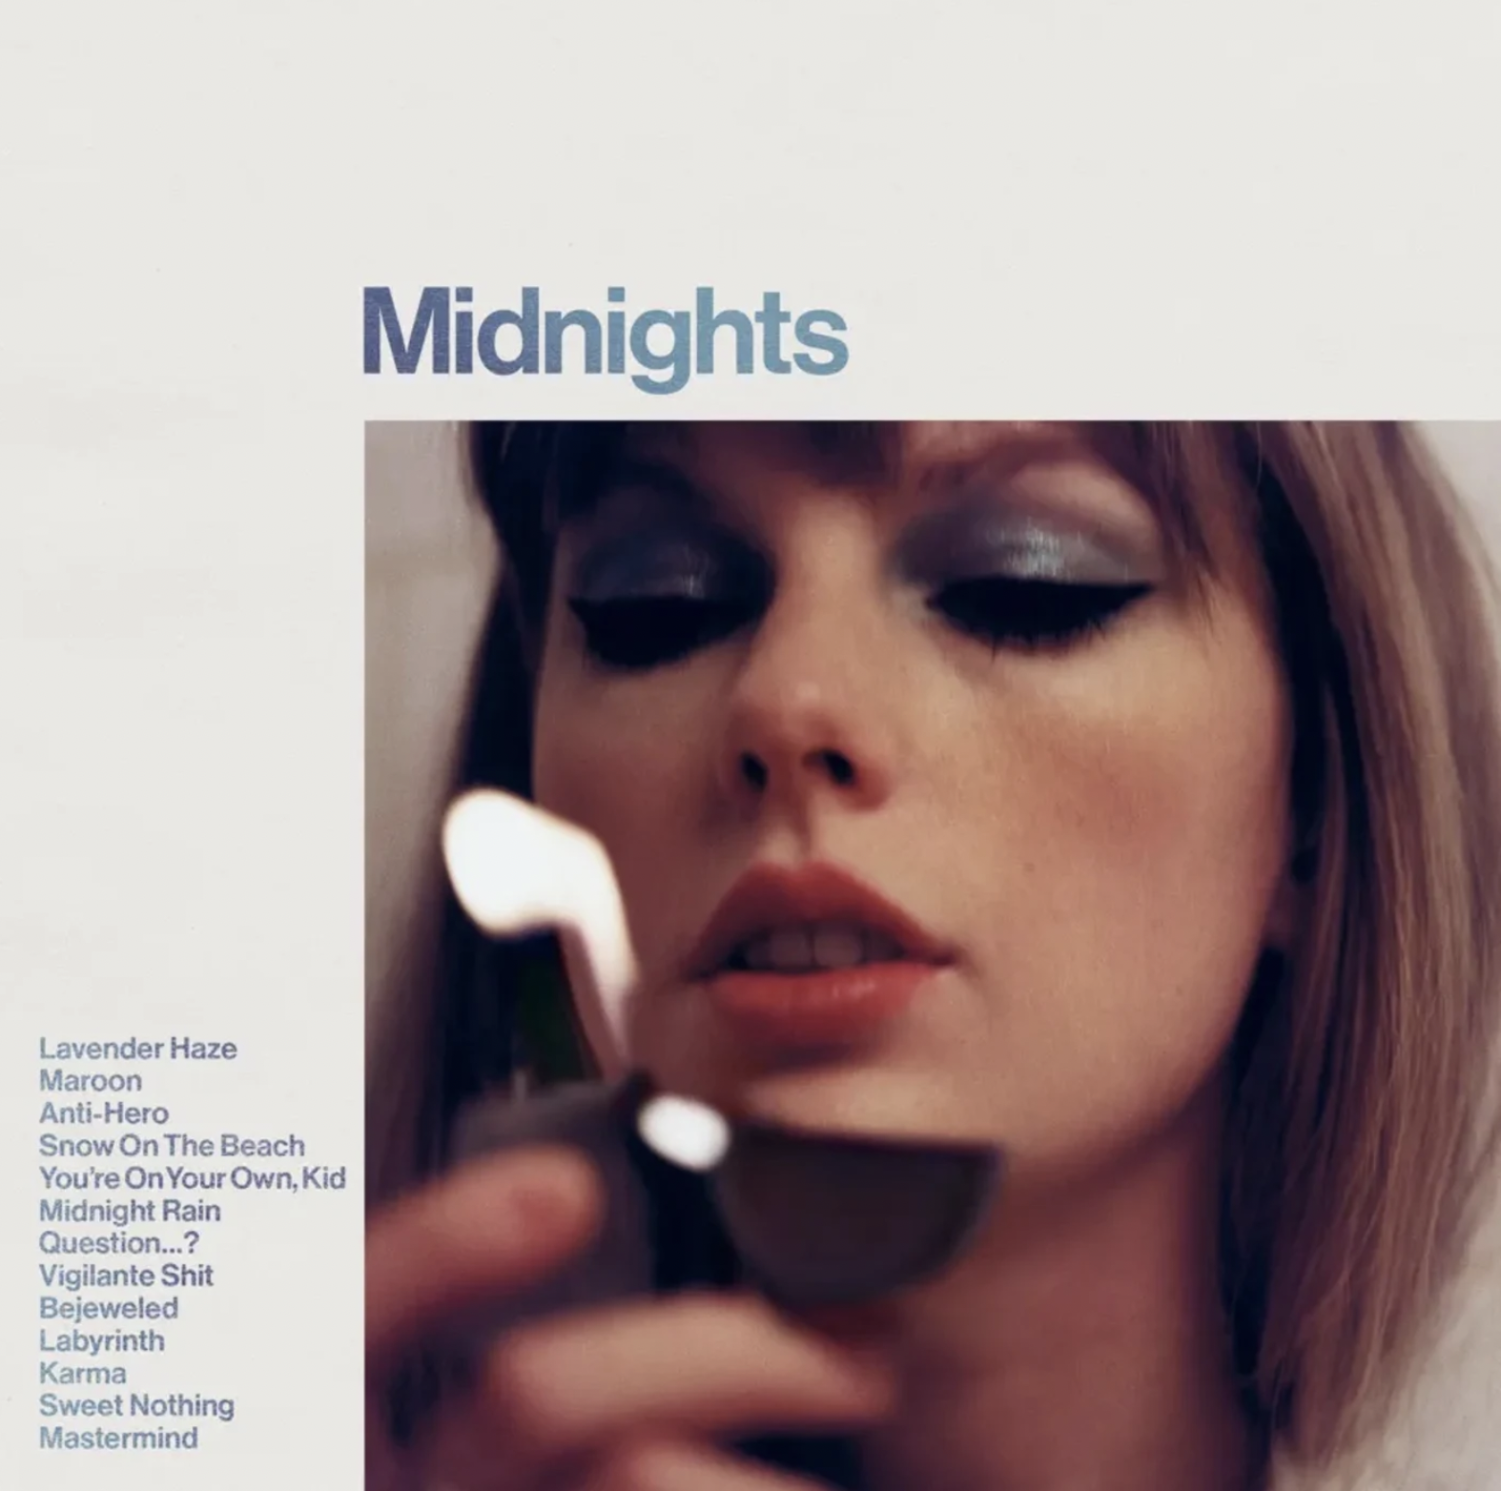 Taylor Swift 'Midnights' Poster – The Indie Planet